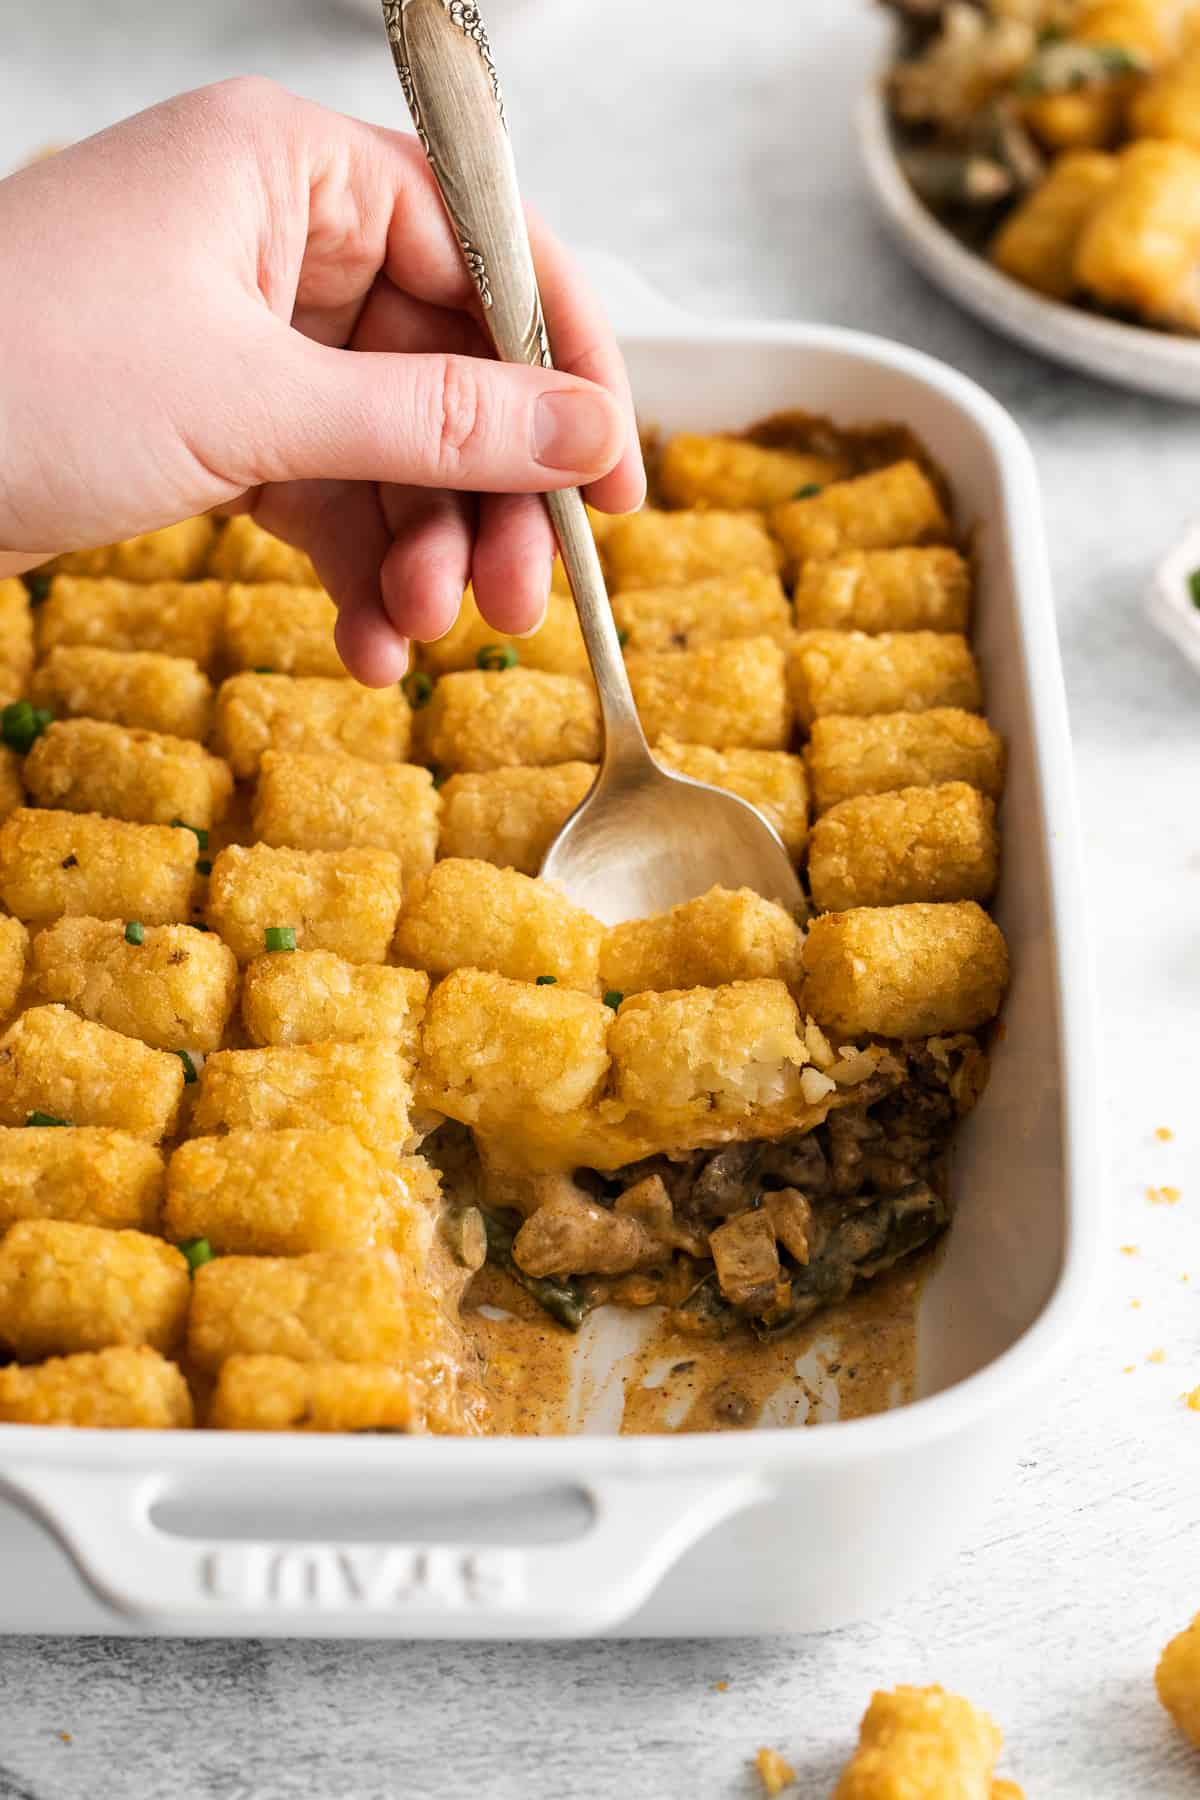 A spoon scooping tater tot hot dish.